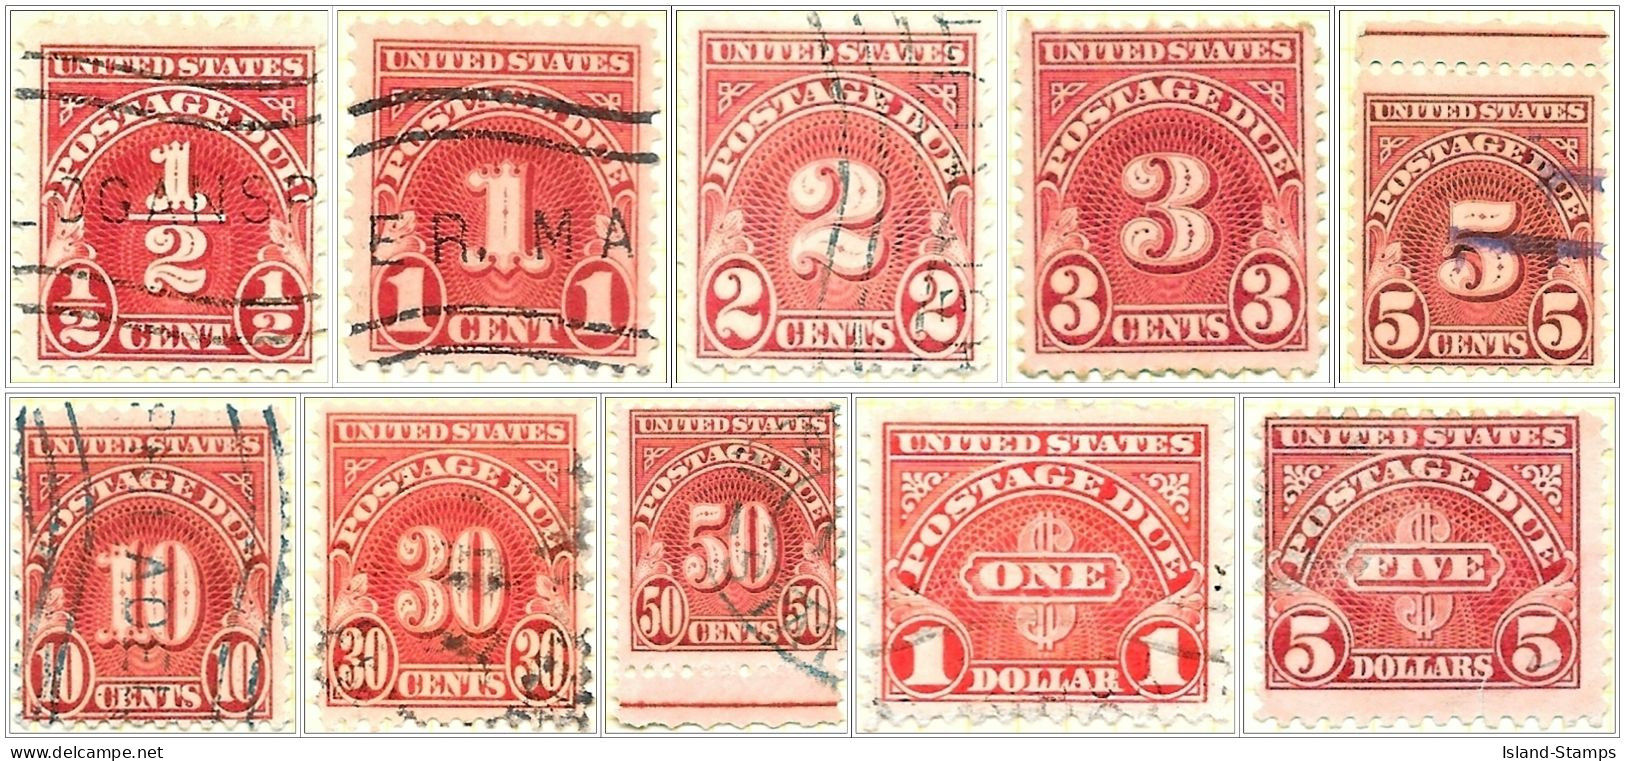 USA 1930/31 Full Set Of Ten Postage Dues Used - Used Stamps